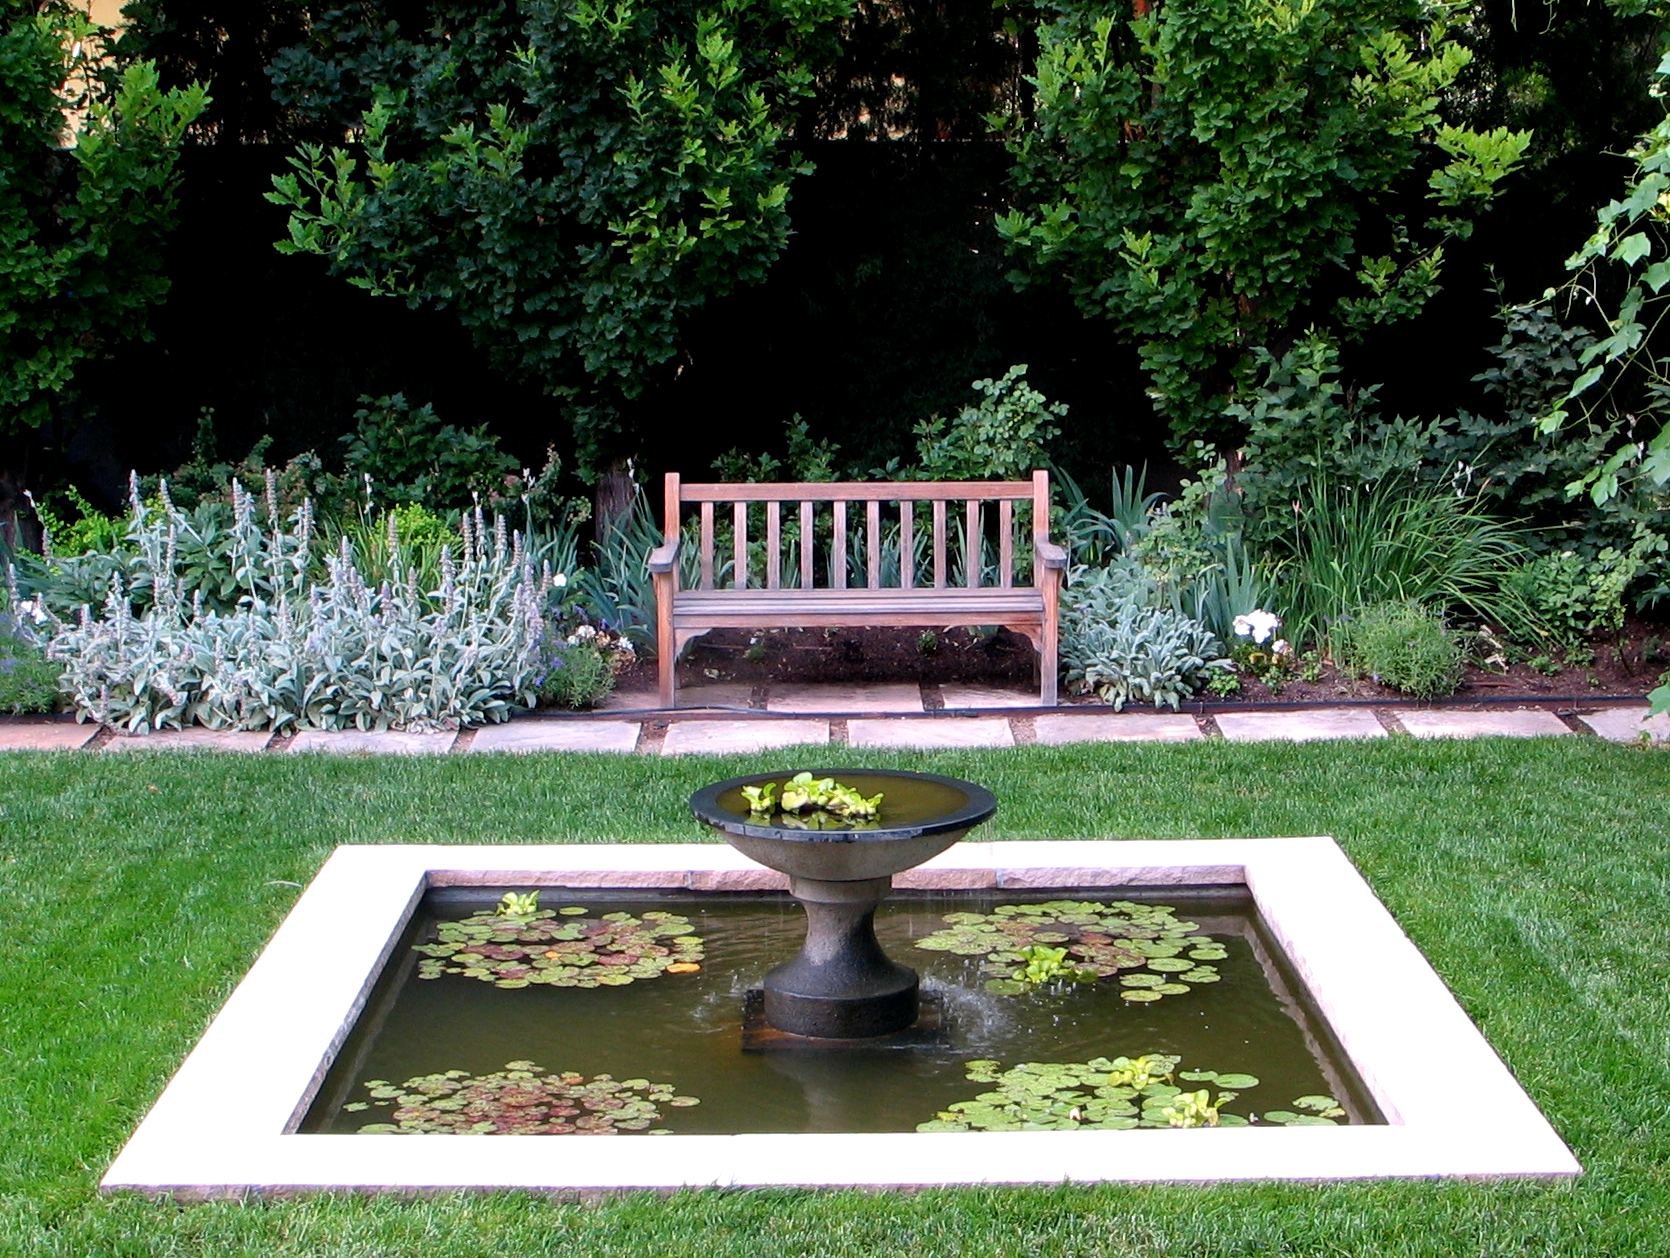 <a href="http://bluelinelandscape.com/gallery-water-features/">Water Features</a>